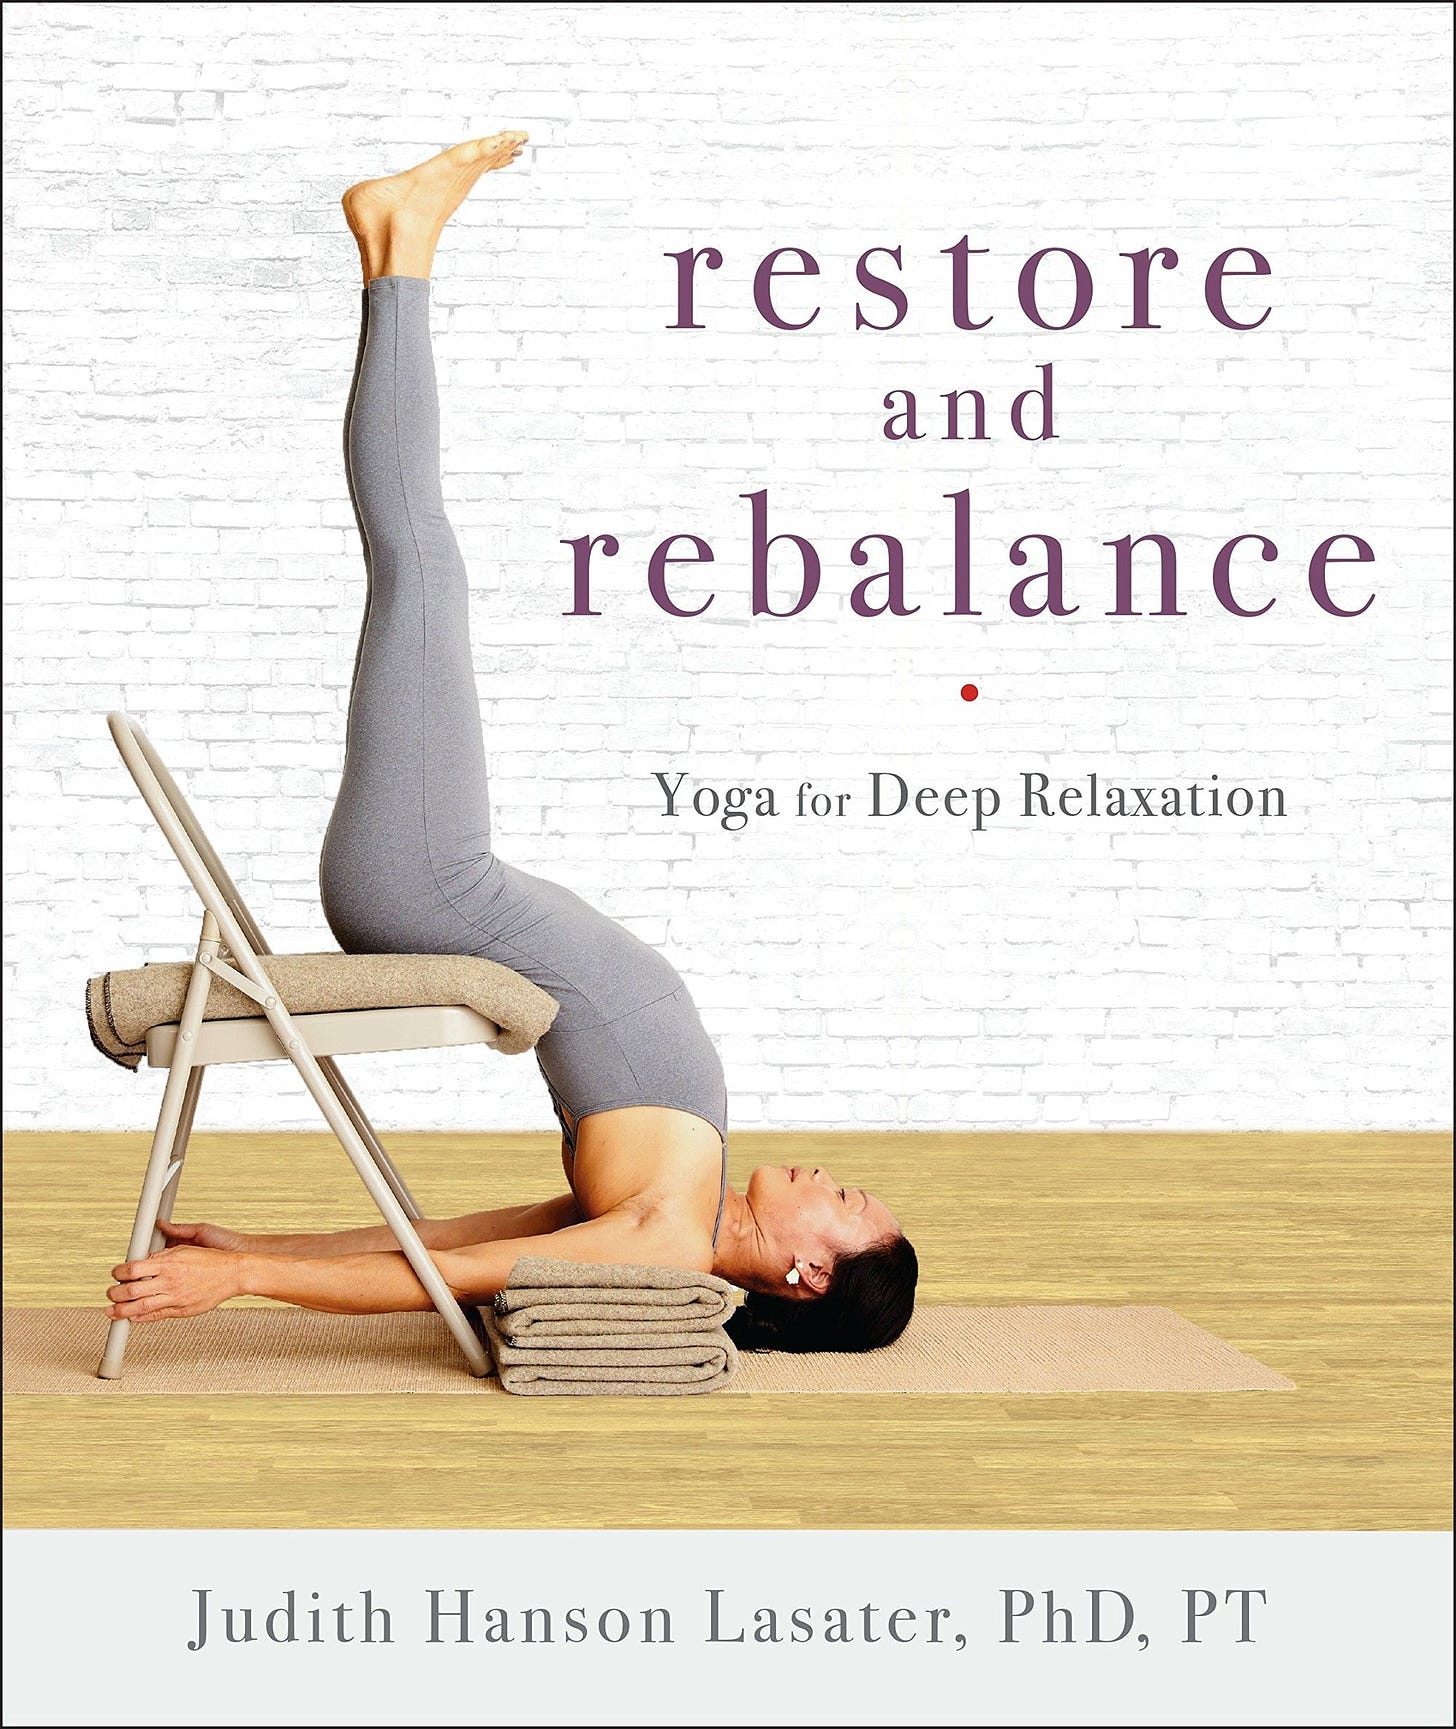 “Restore and Rebalance: Yoga for Deep Relaxation” by Judith Hanson Lasater